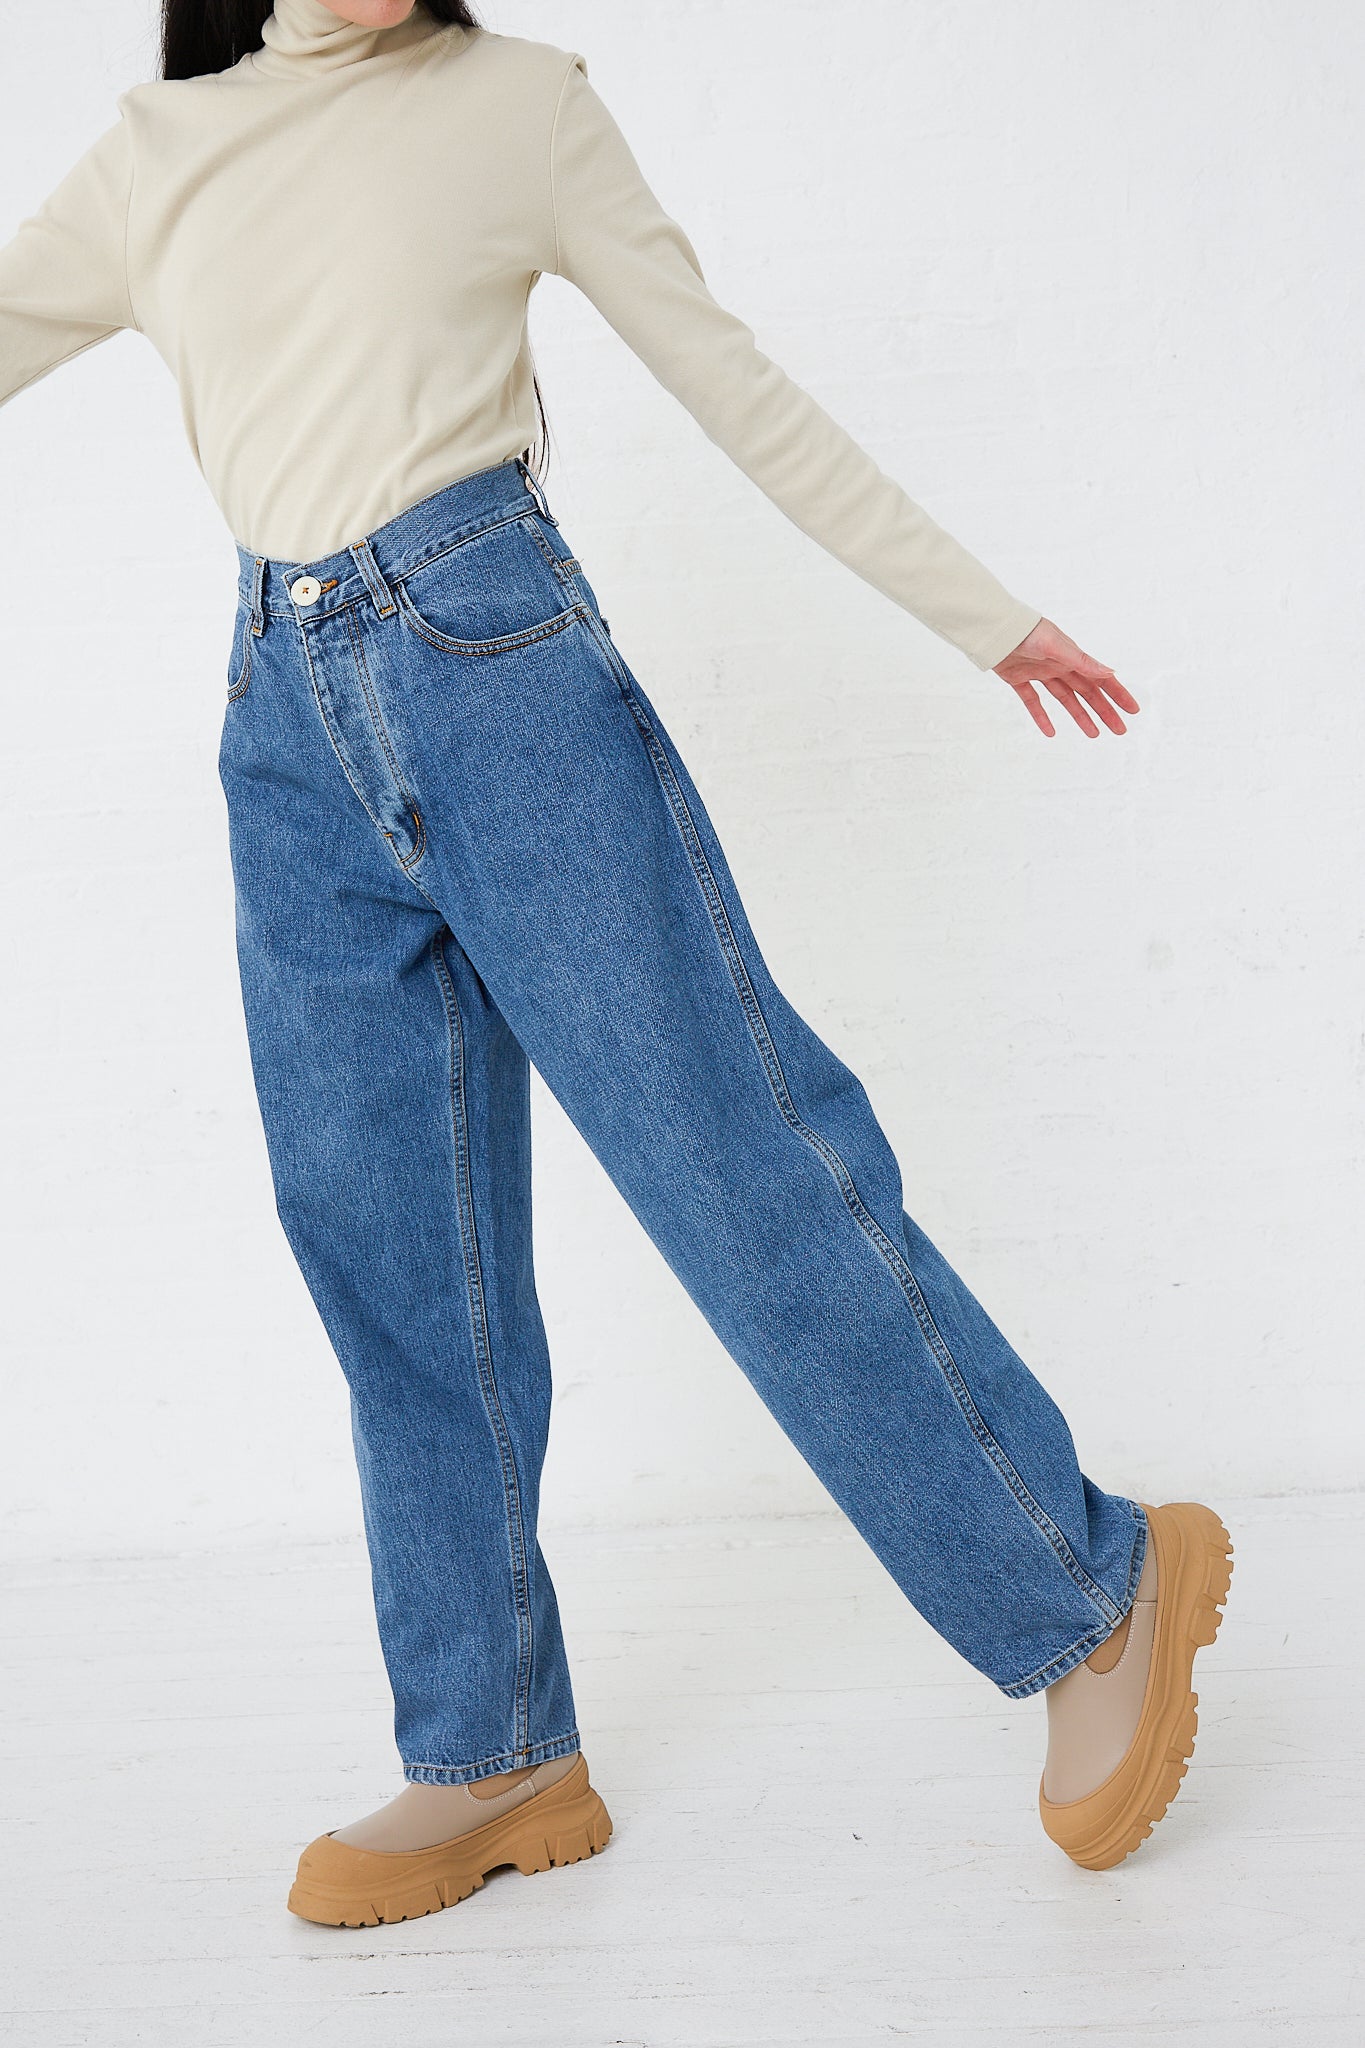 A woman wearing Jesse Kamm's Japanese Denim California Wide in Cowboy Blue pants, complemented by a minimalist turtleneck.